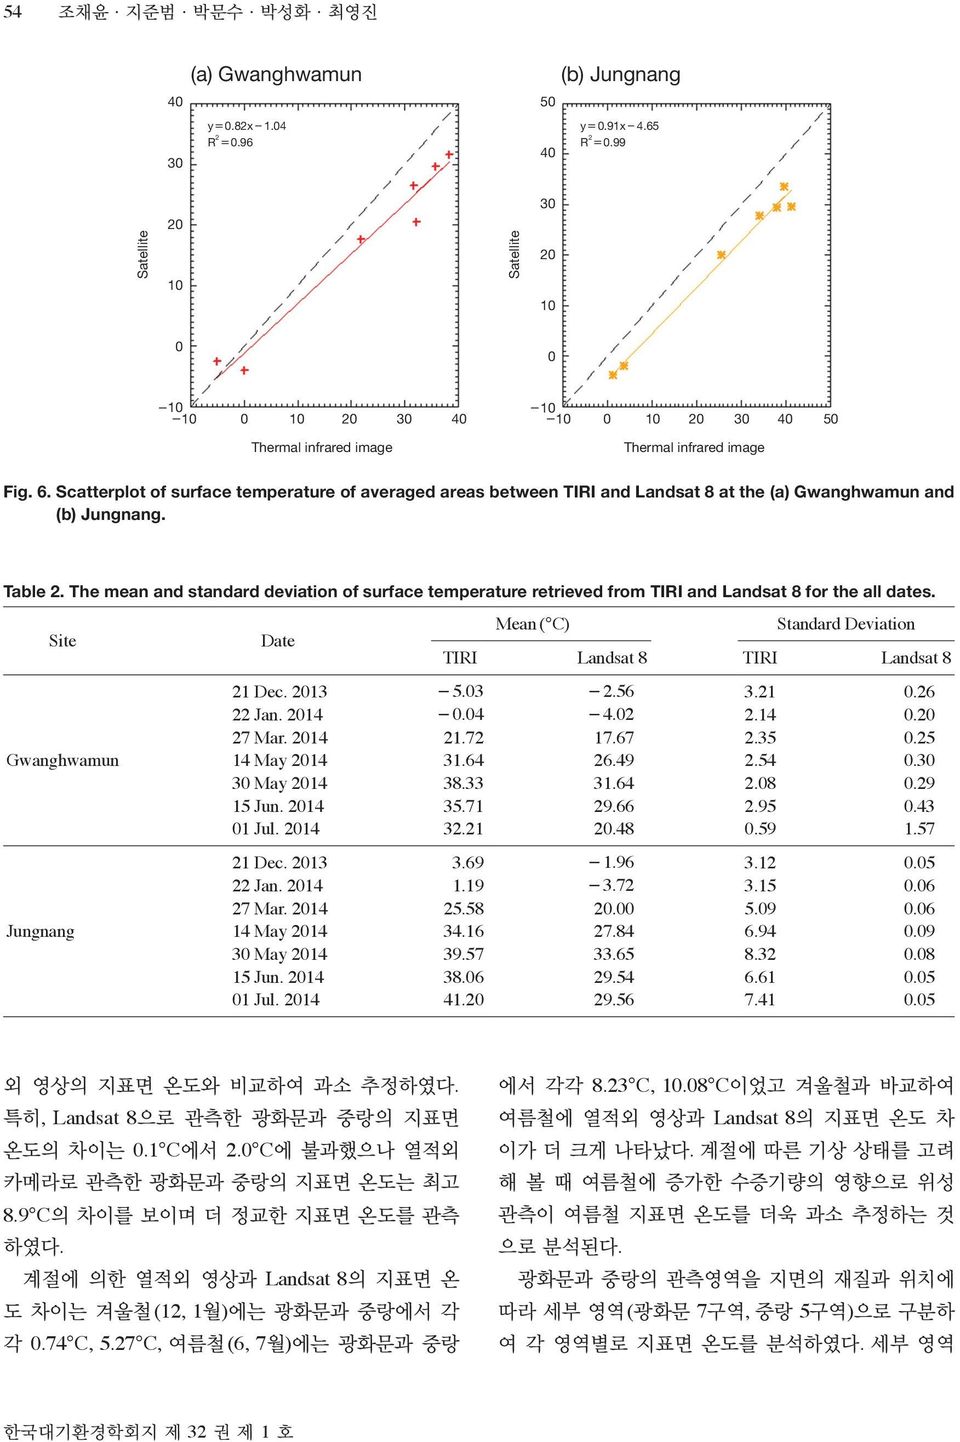 Scatterplot of surface temperature of averaged areas between TIRI and Landsat 8 at the (a) Gwanghwamun and (b) Jungnang. Table 2.